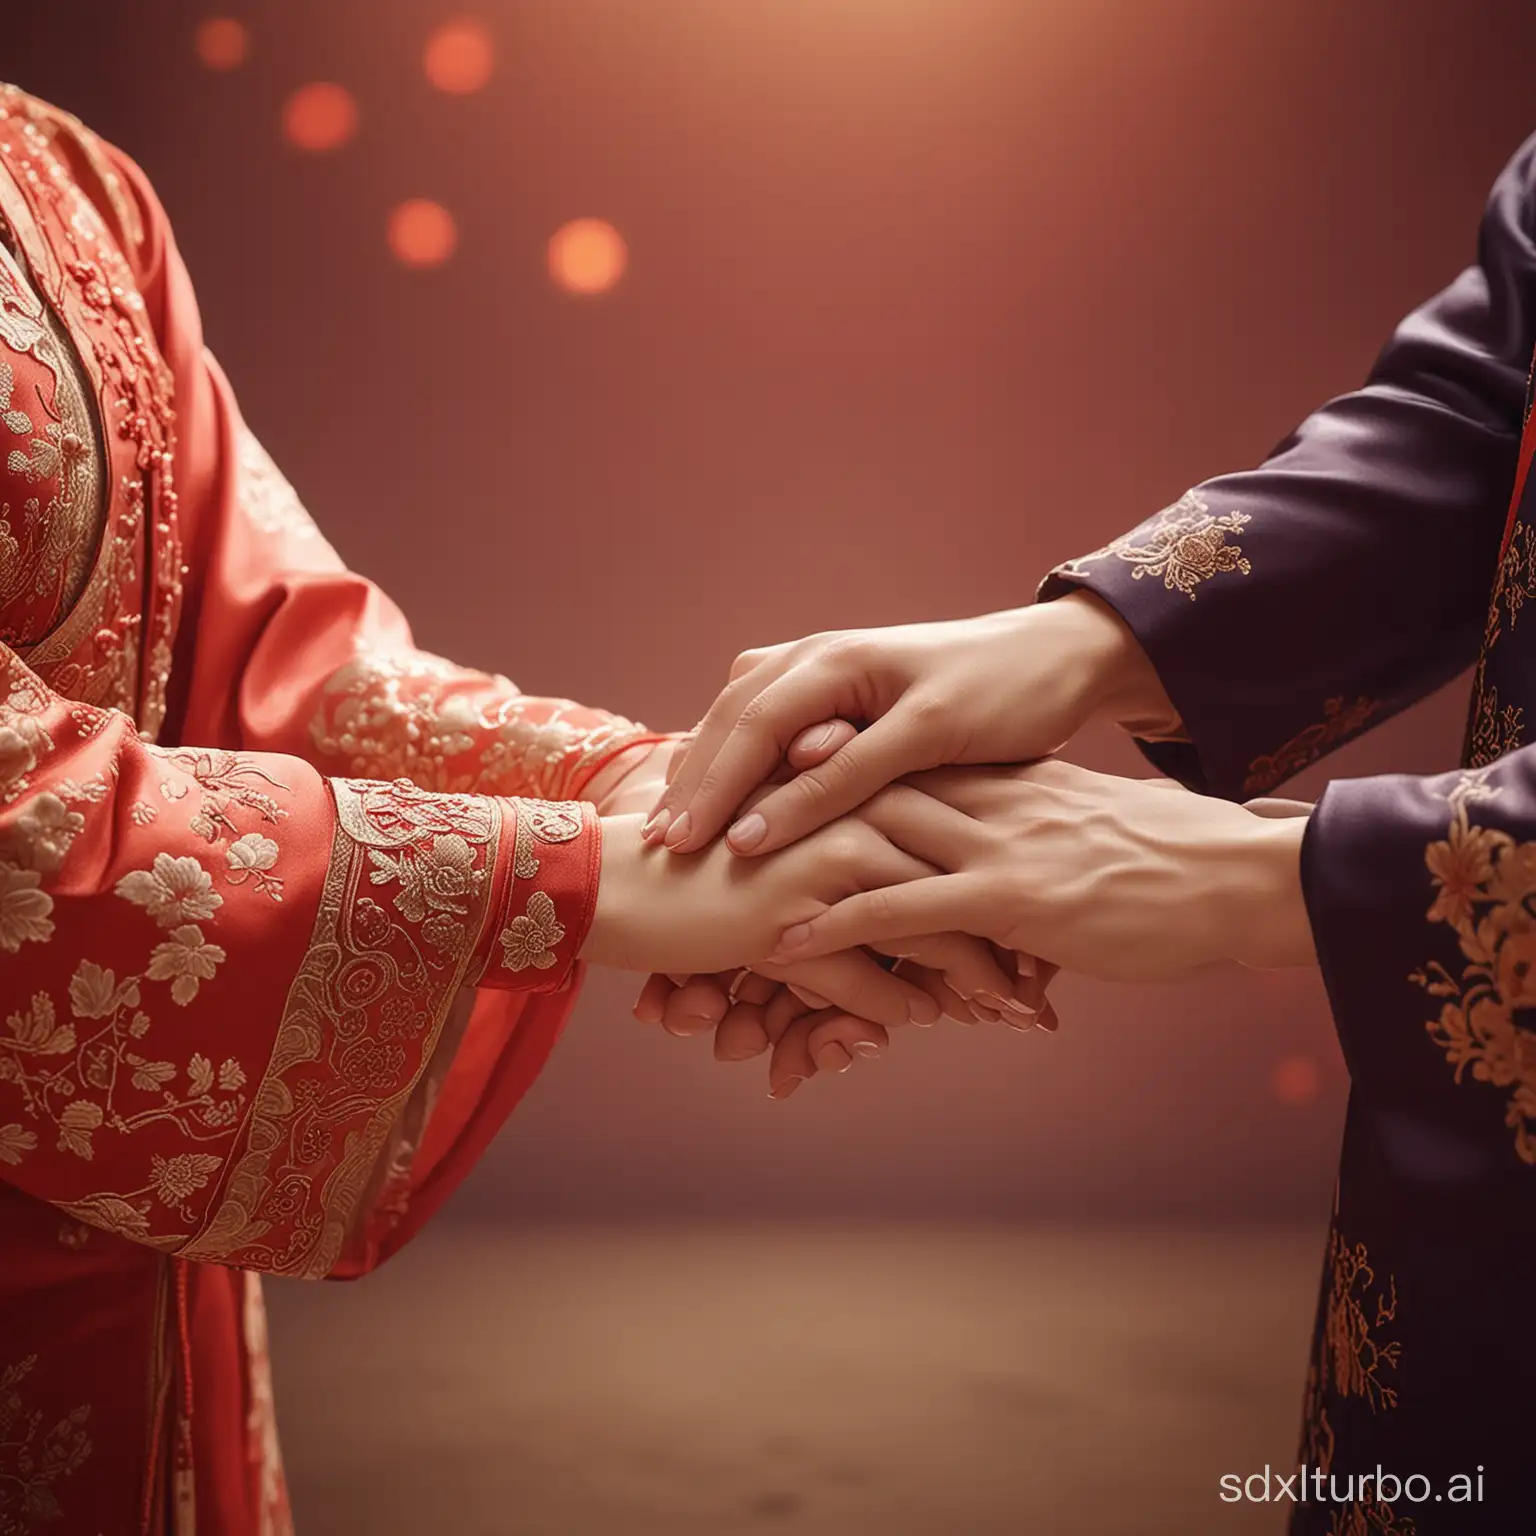 Romantic-Chinesestyle-Couple-Holding-Hands-in-Festive-Setting